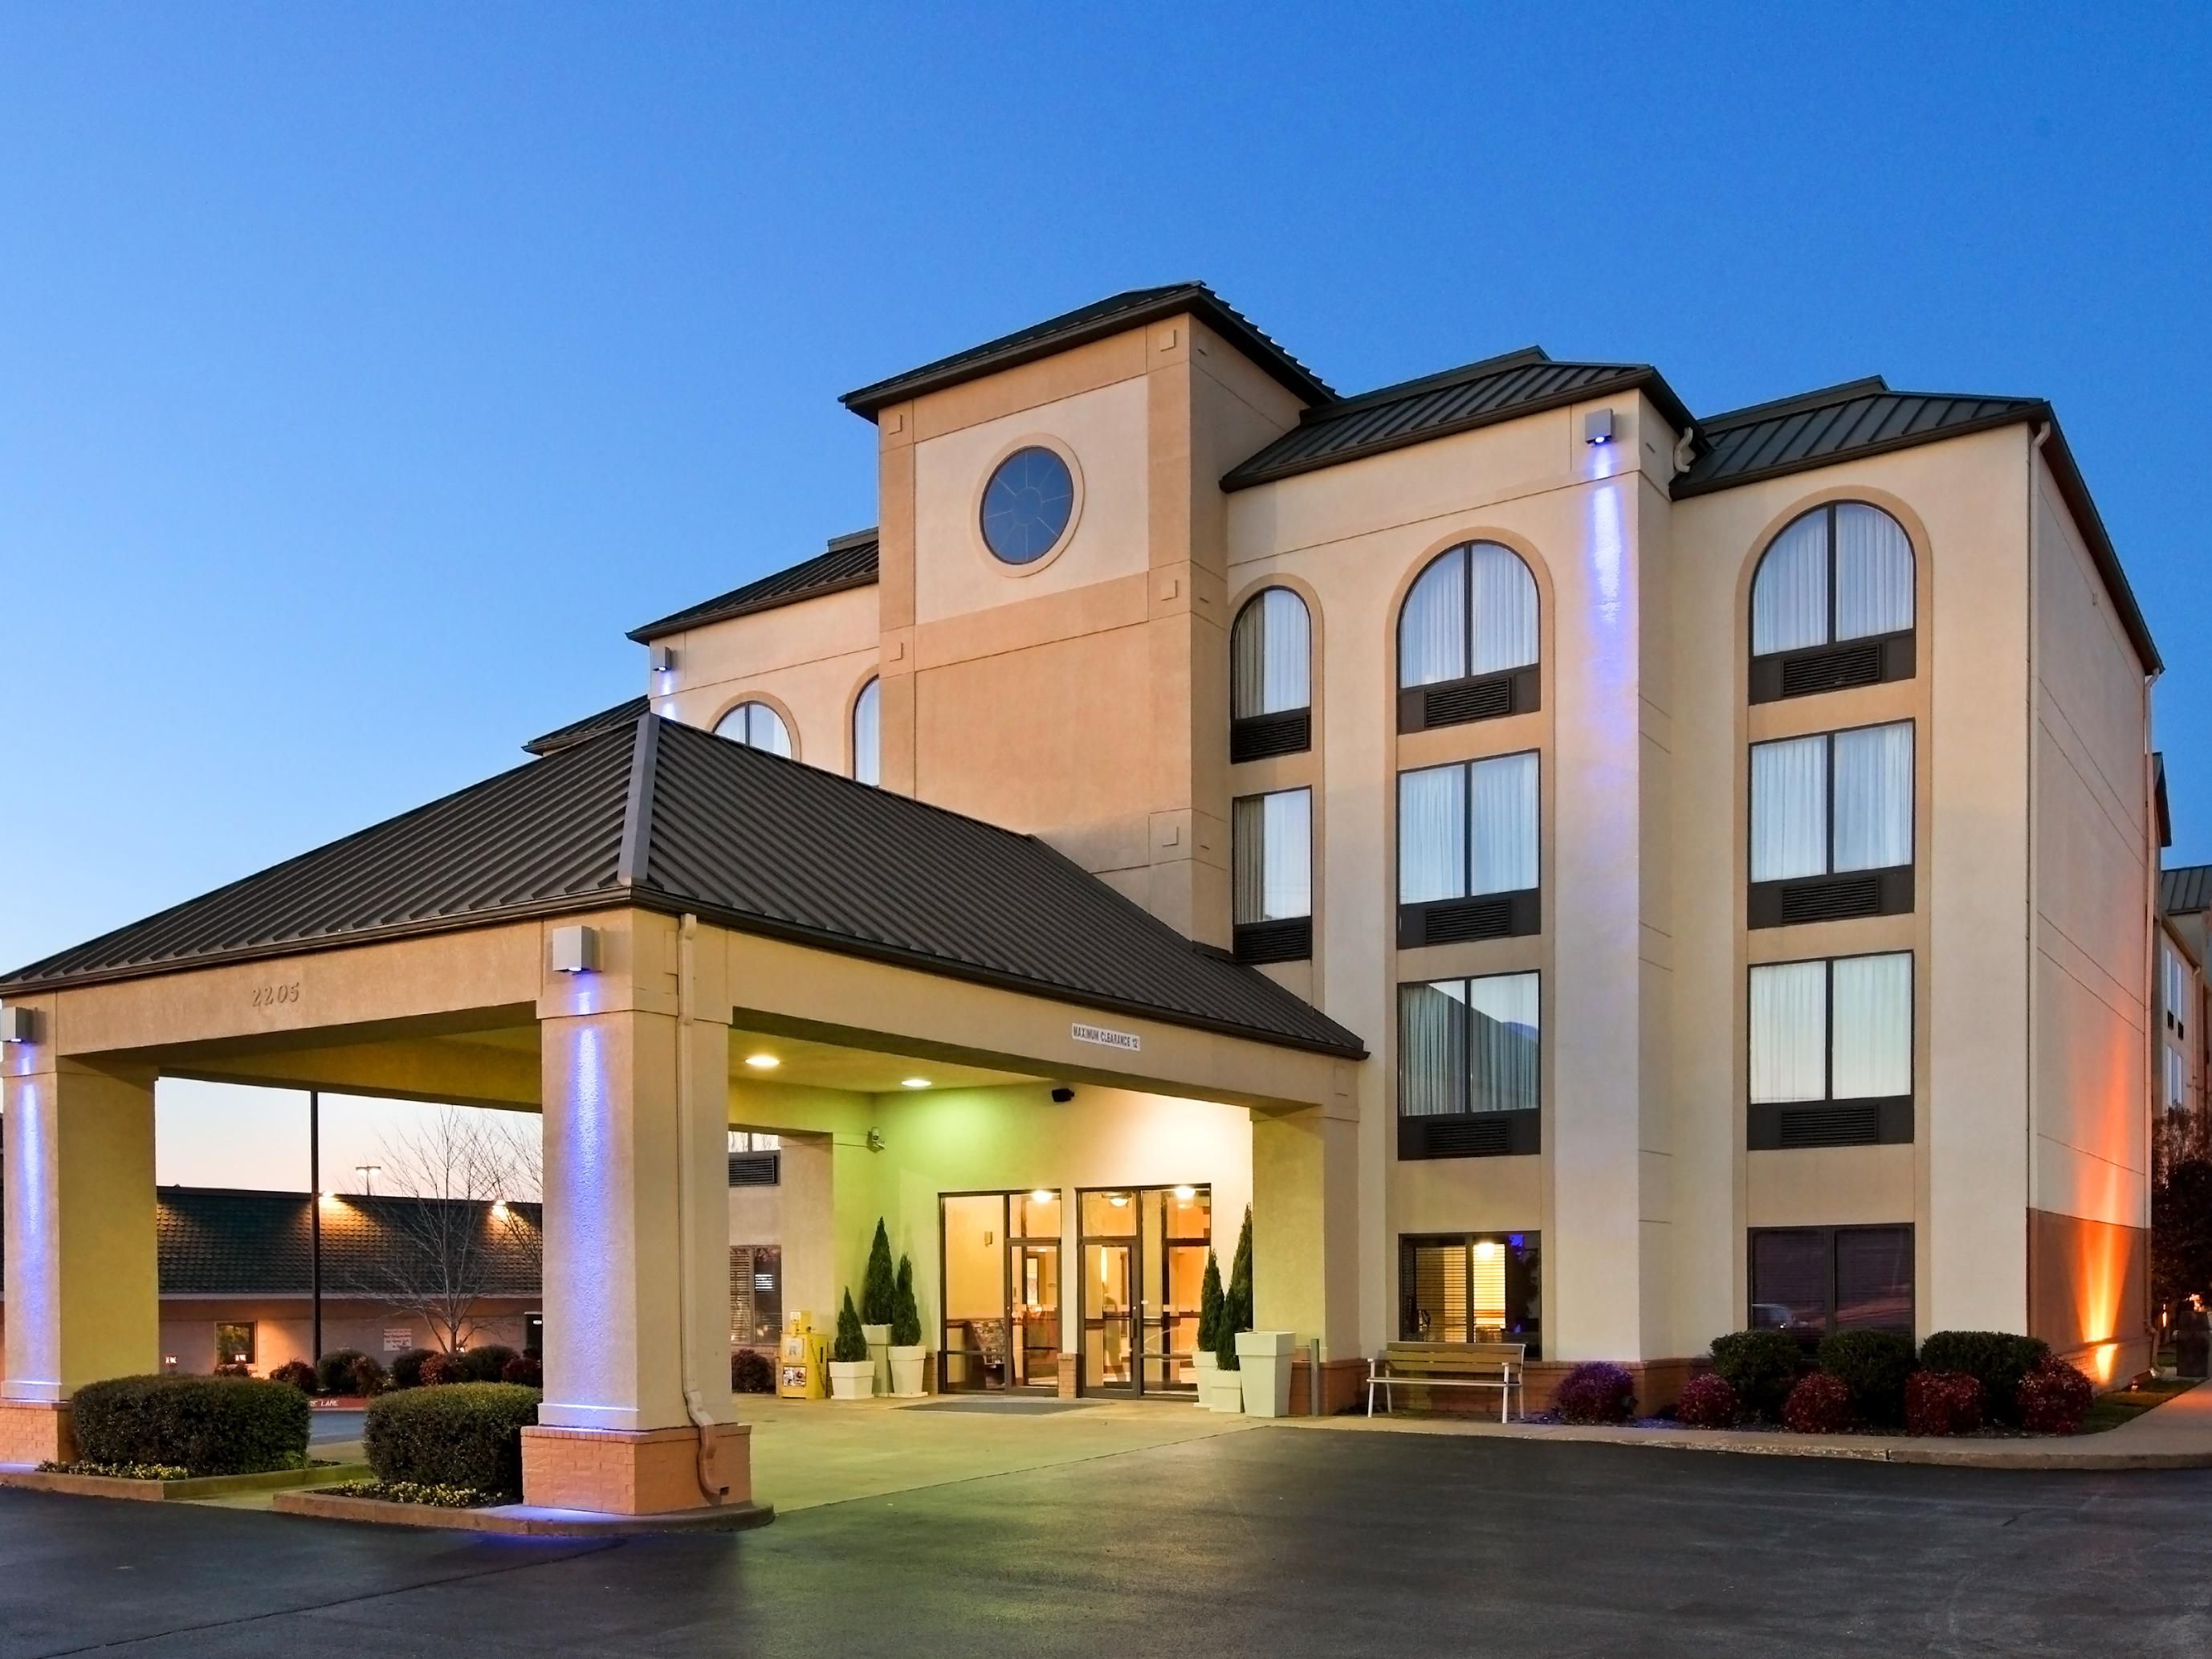 The properties located in Northwest Arkansas include the Holiday Inn Express  Suites Bentonville and the Fairfield Inn  S